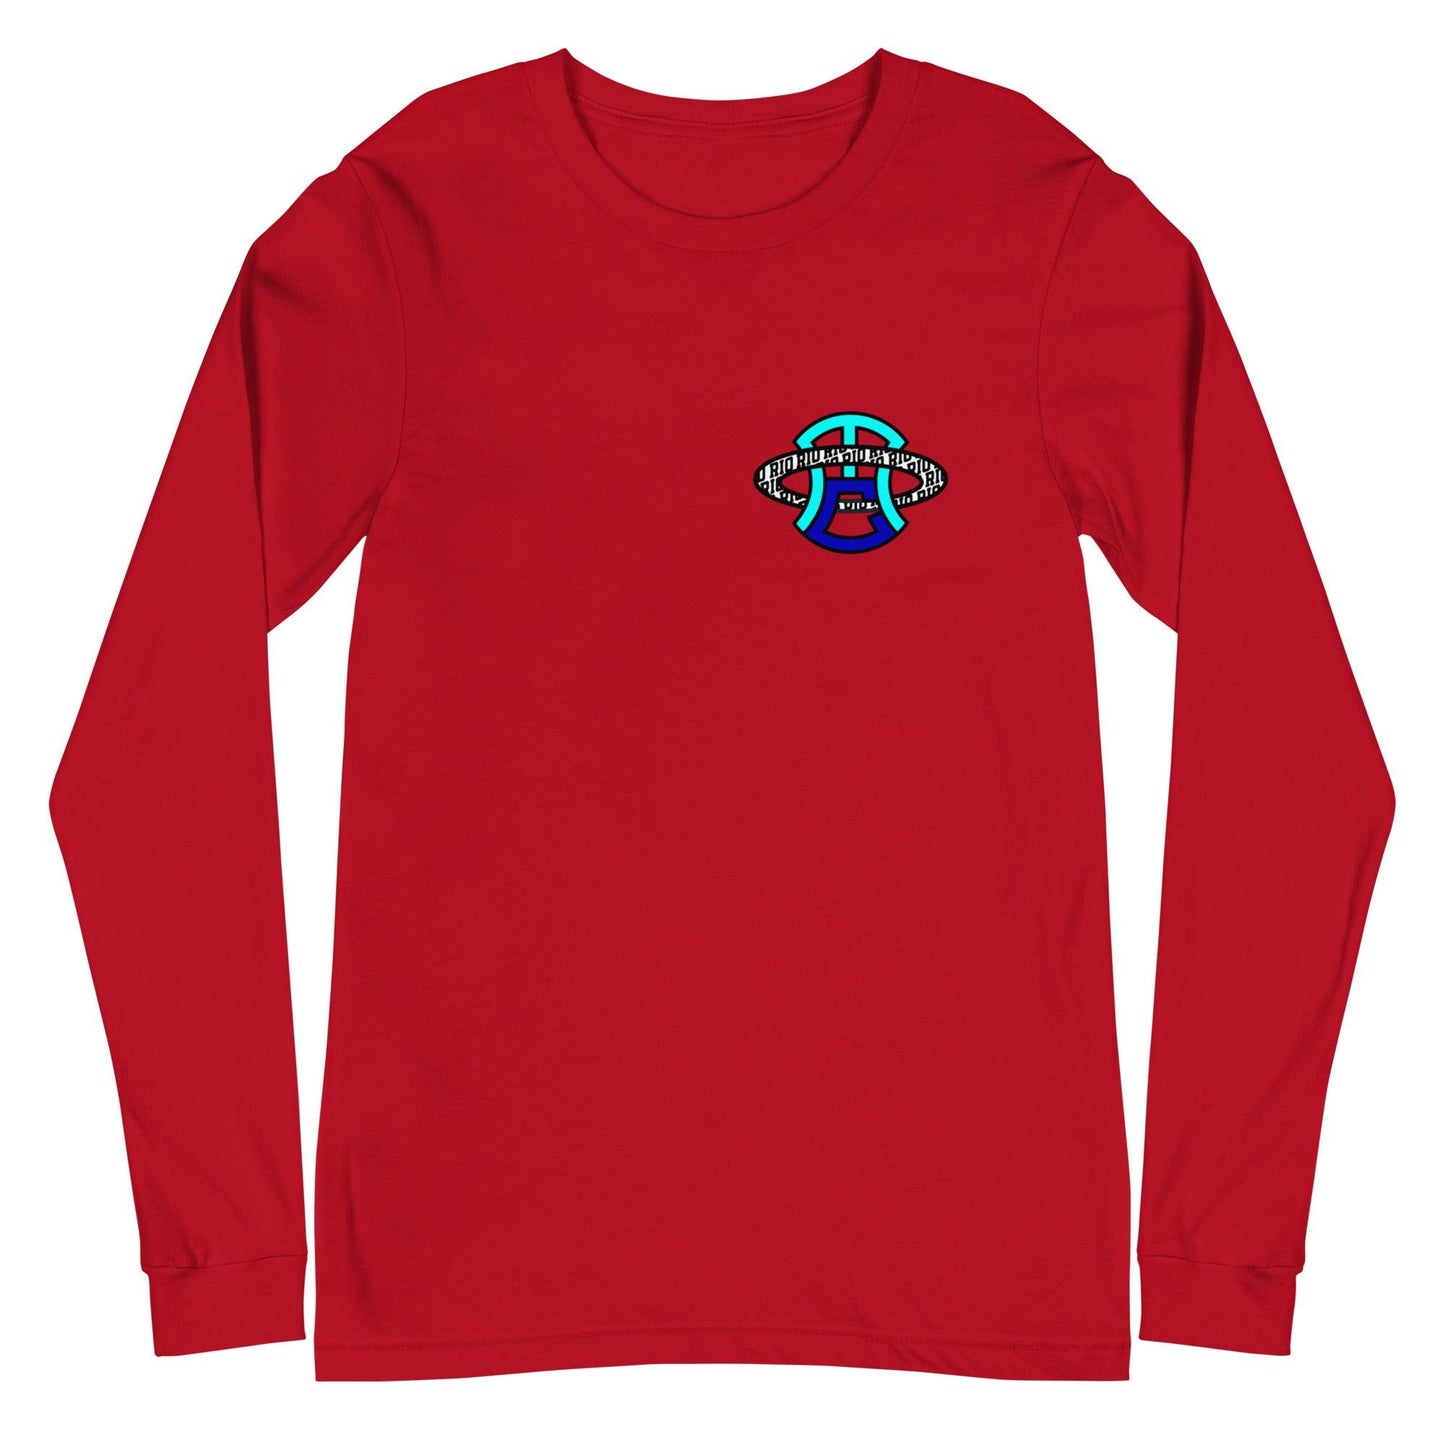 Mario Chalmers “signature” Long Sleeve Tee - Fan Arch